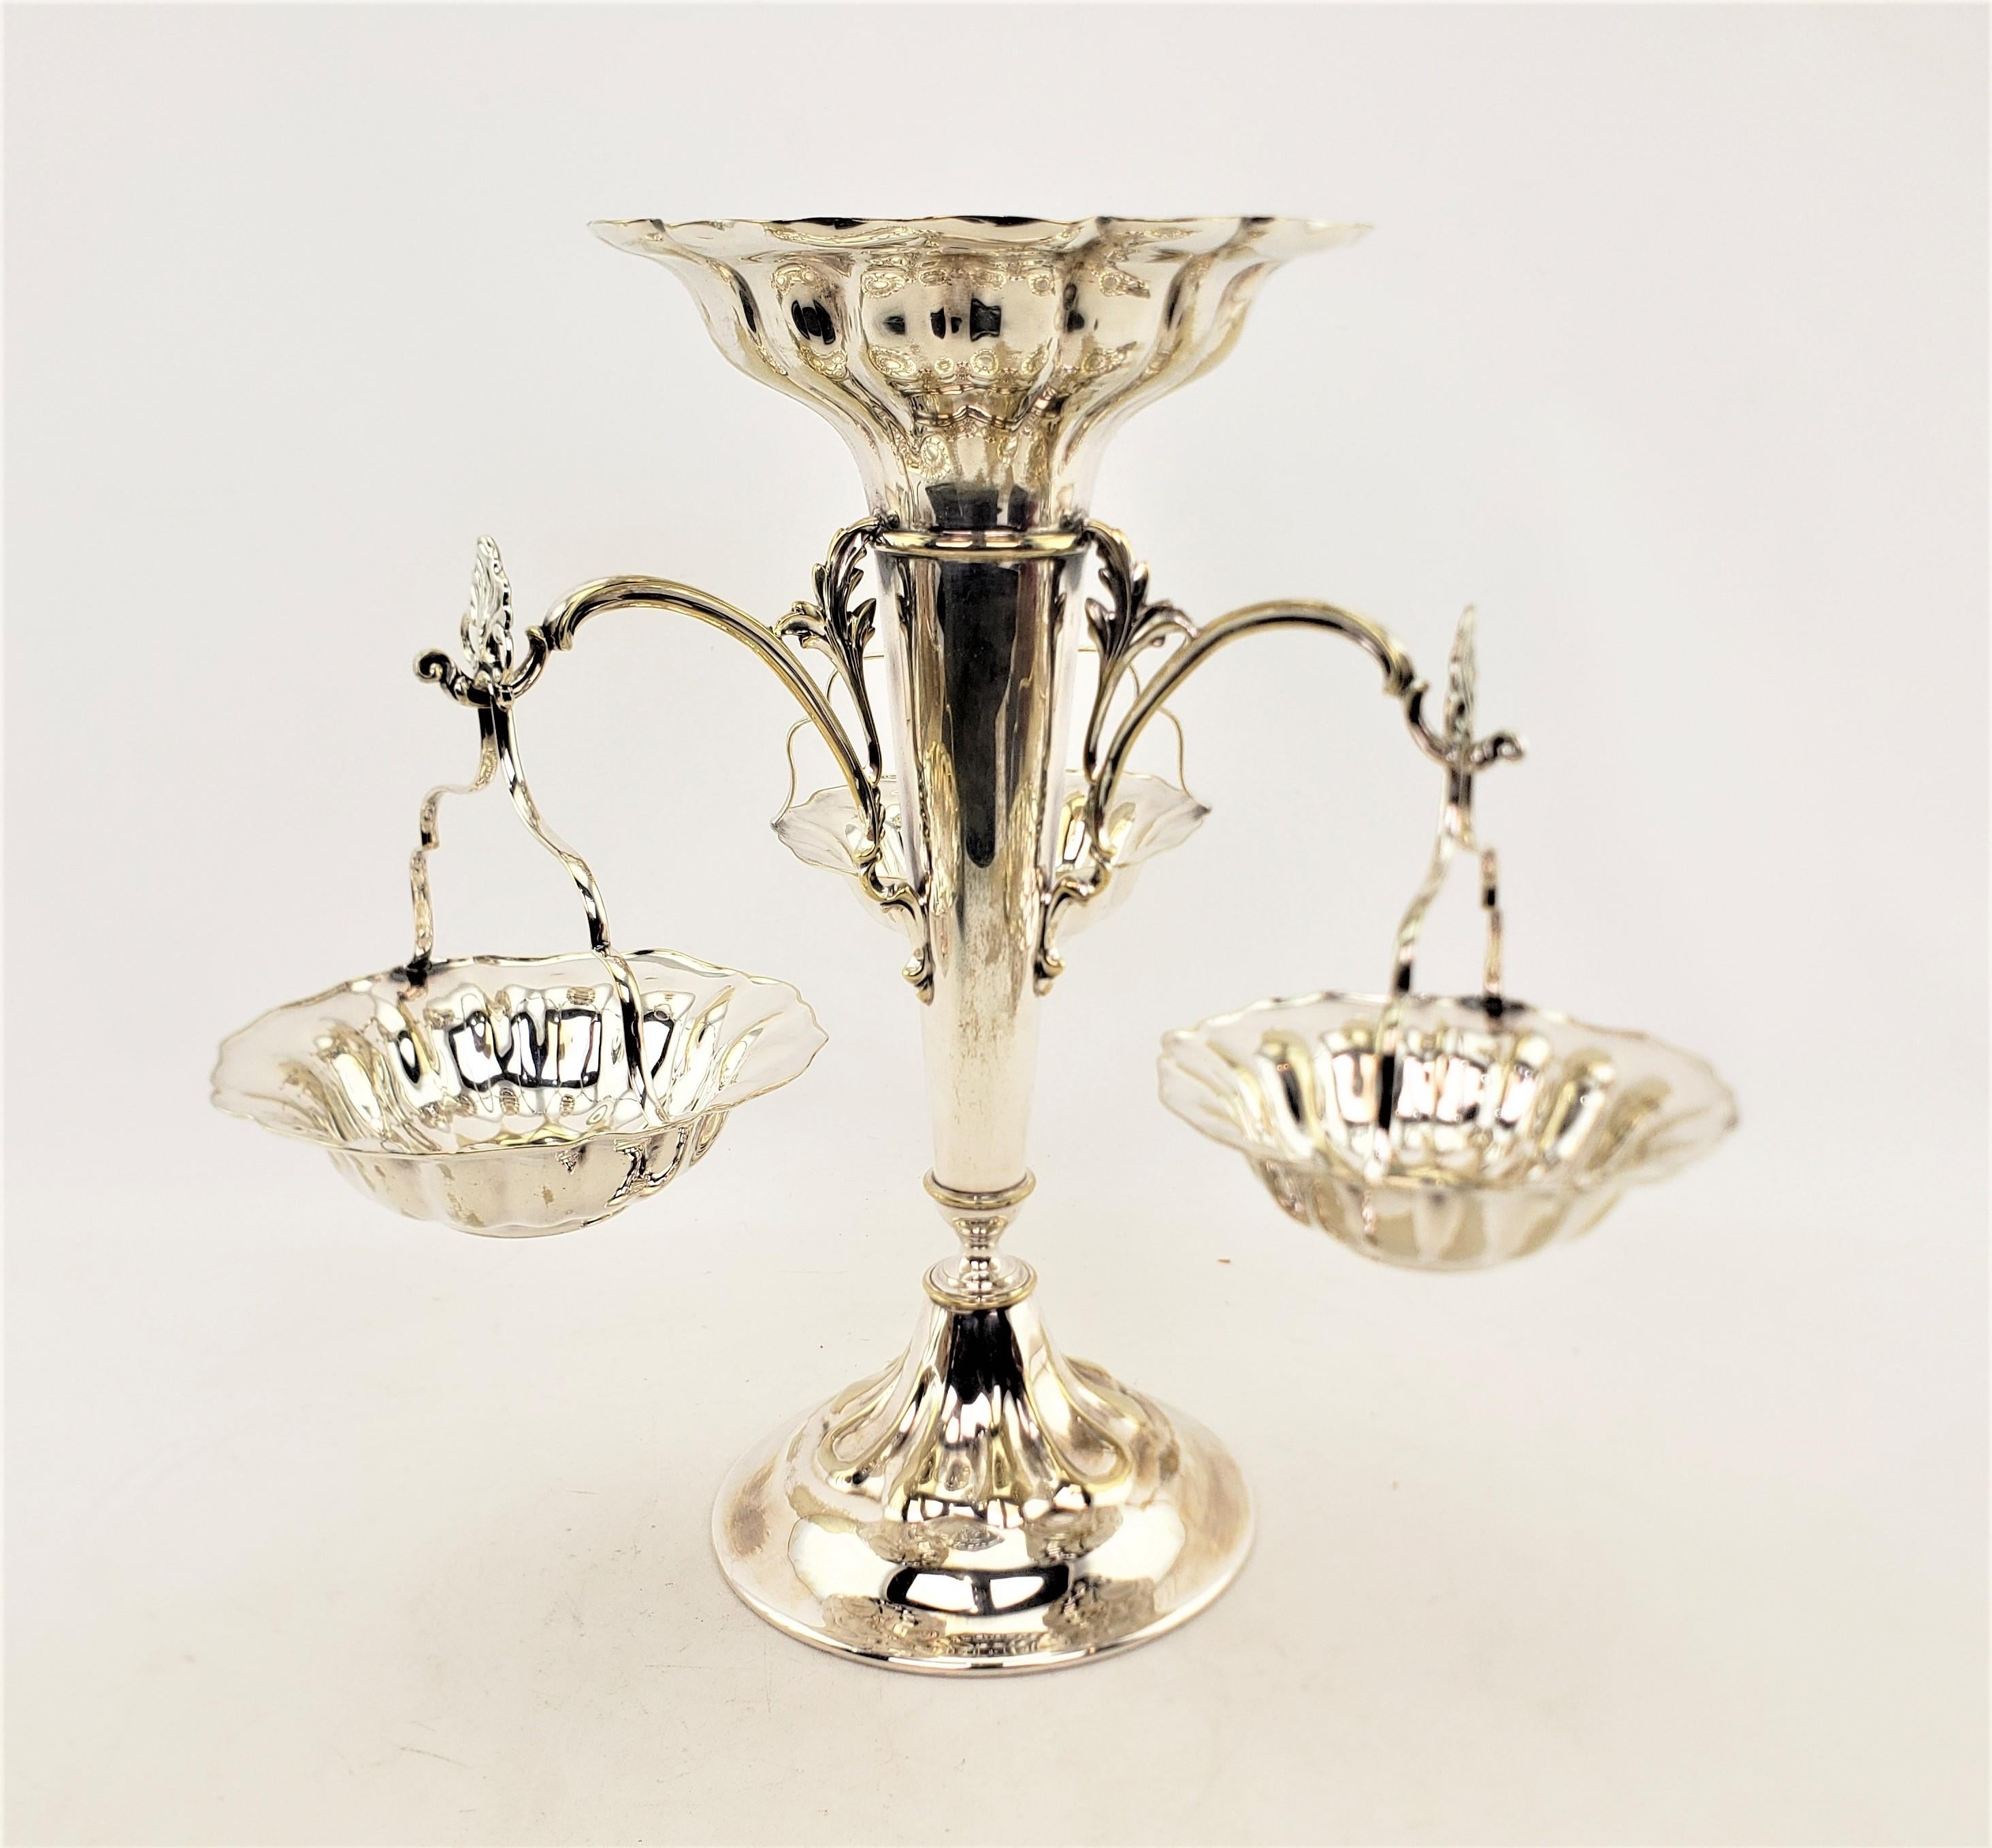 Antique English Elkington Silver Plated Epergne or Centerpiece with Side Baskets For Sale 2